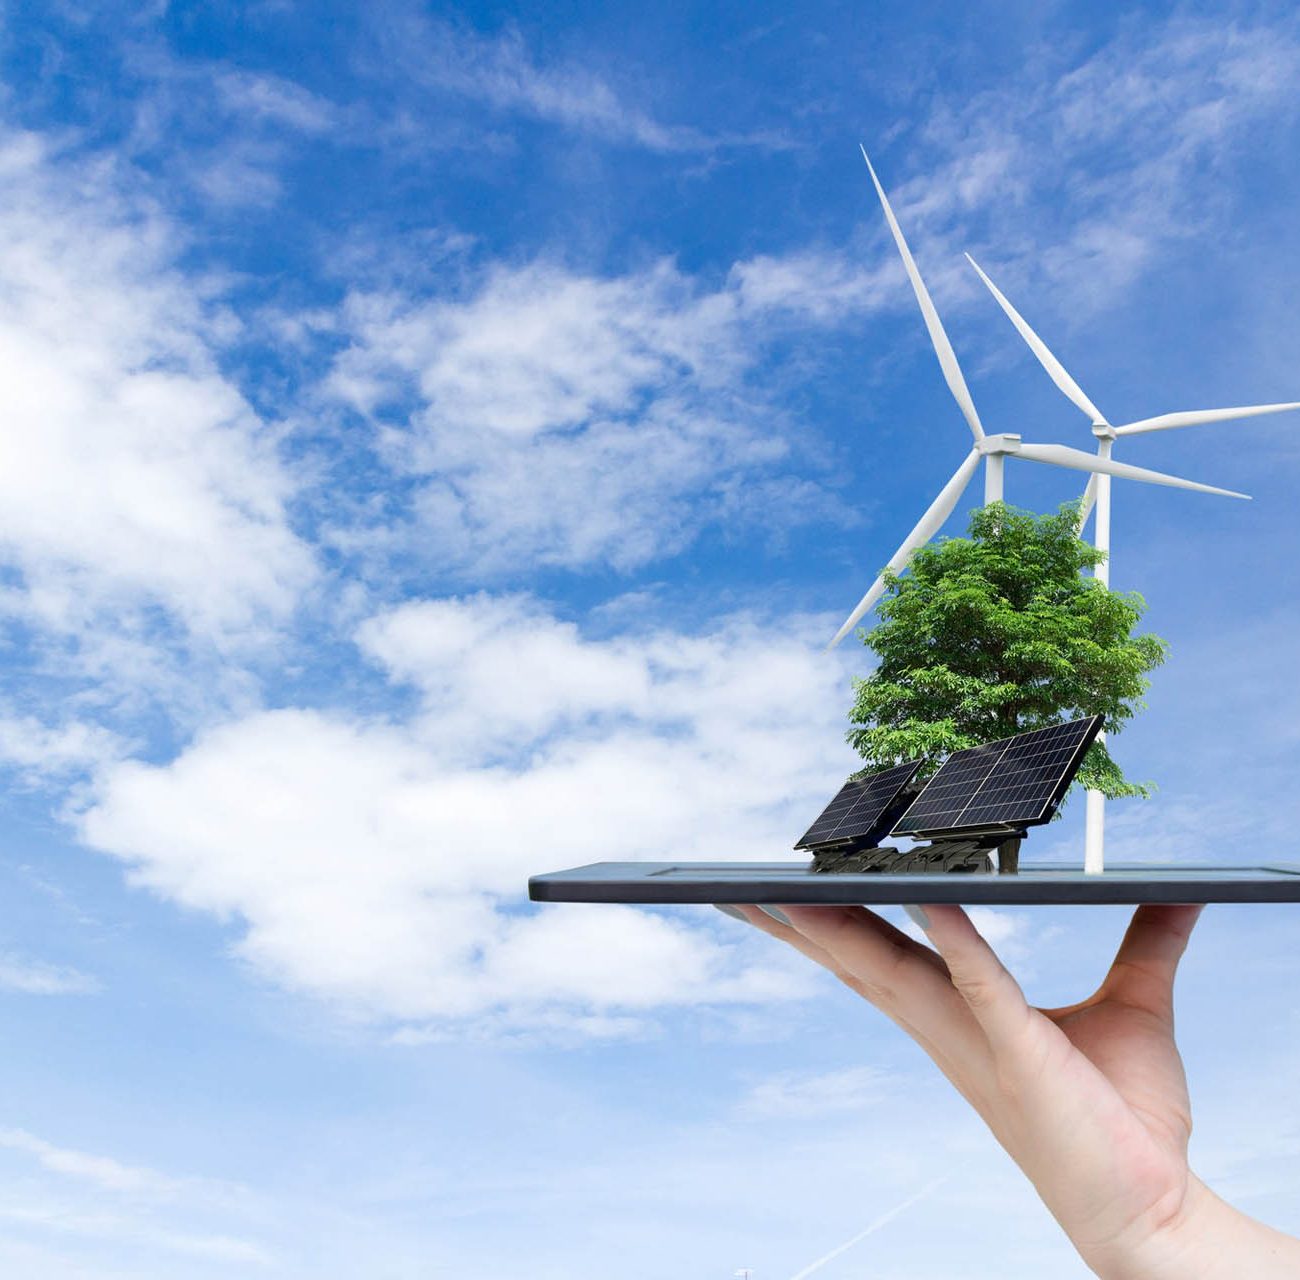 ecological-system-solar-energy-city-hand-holding-tablet